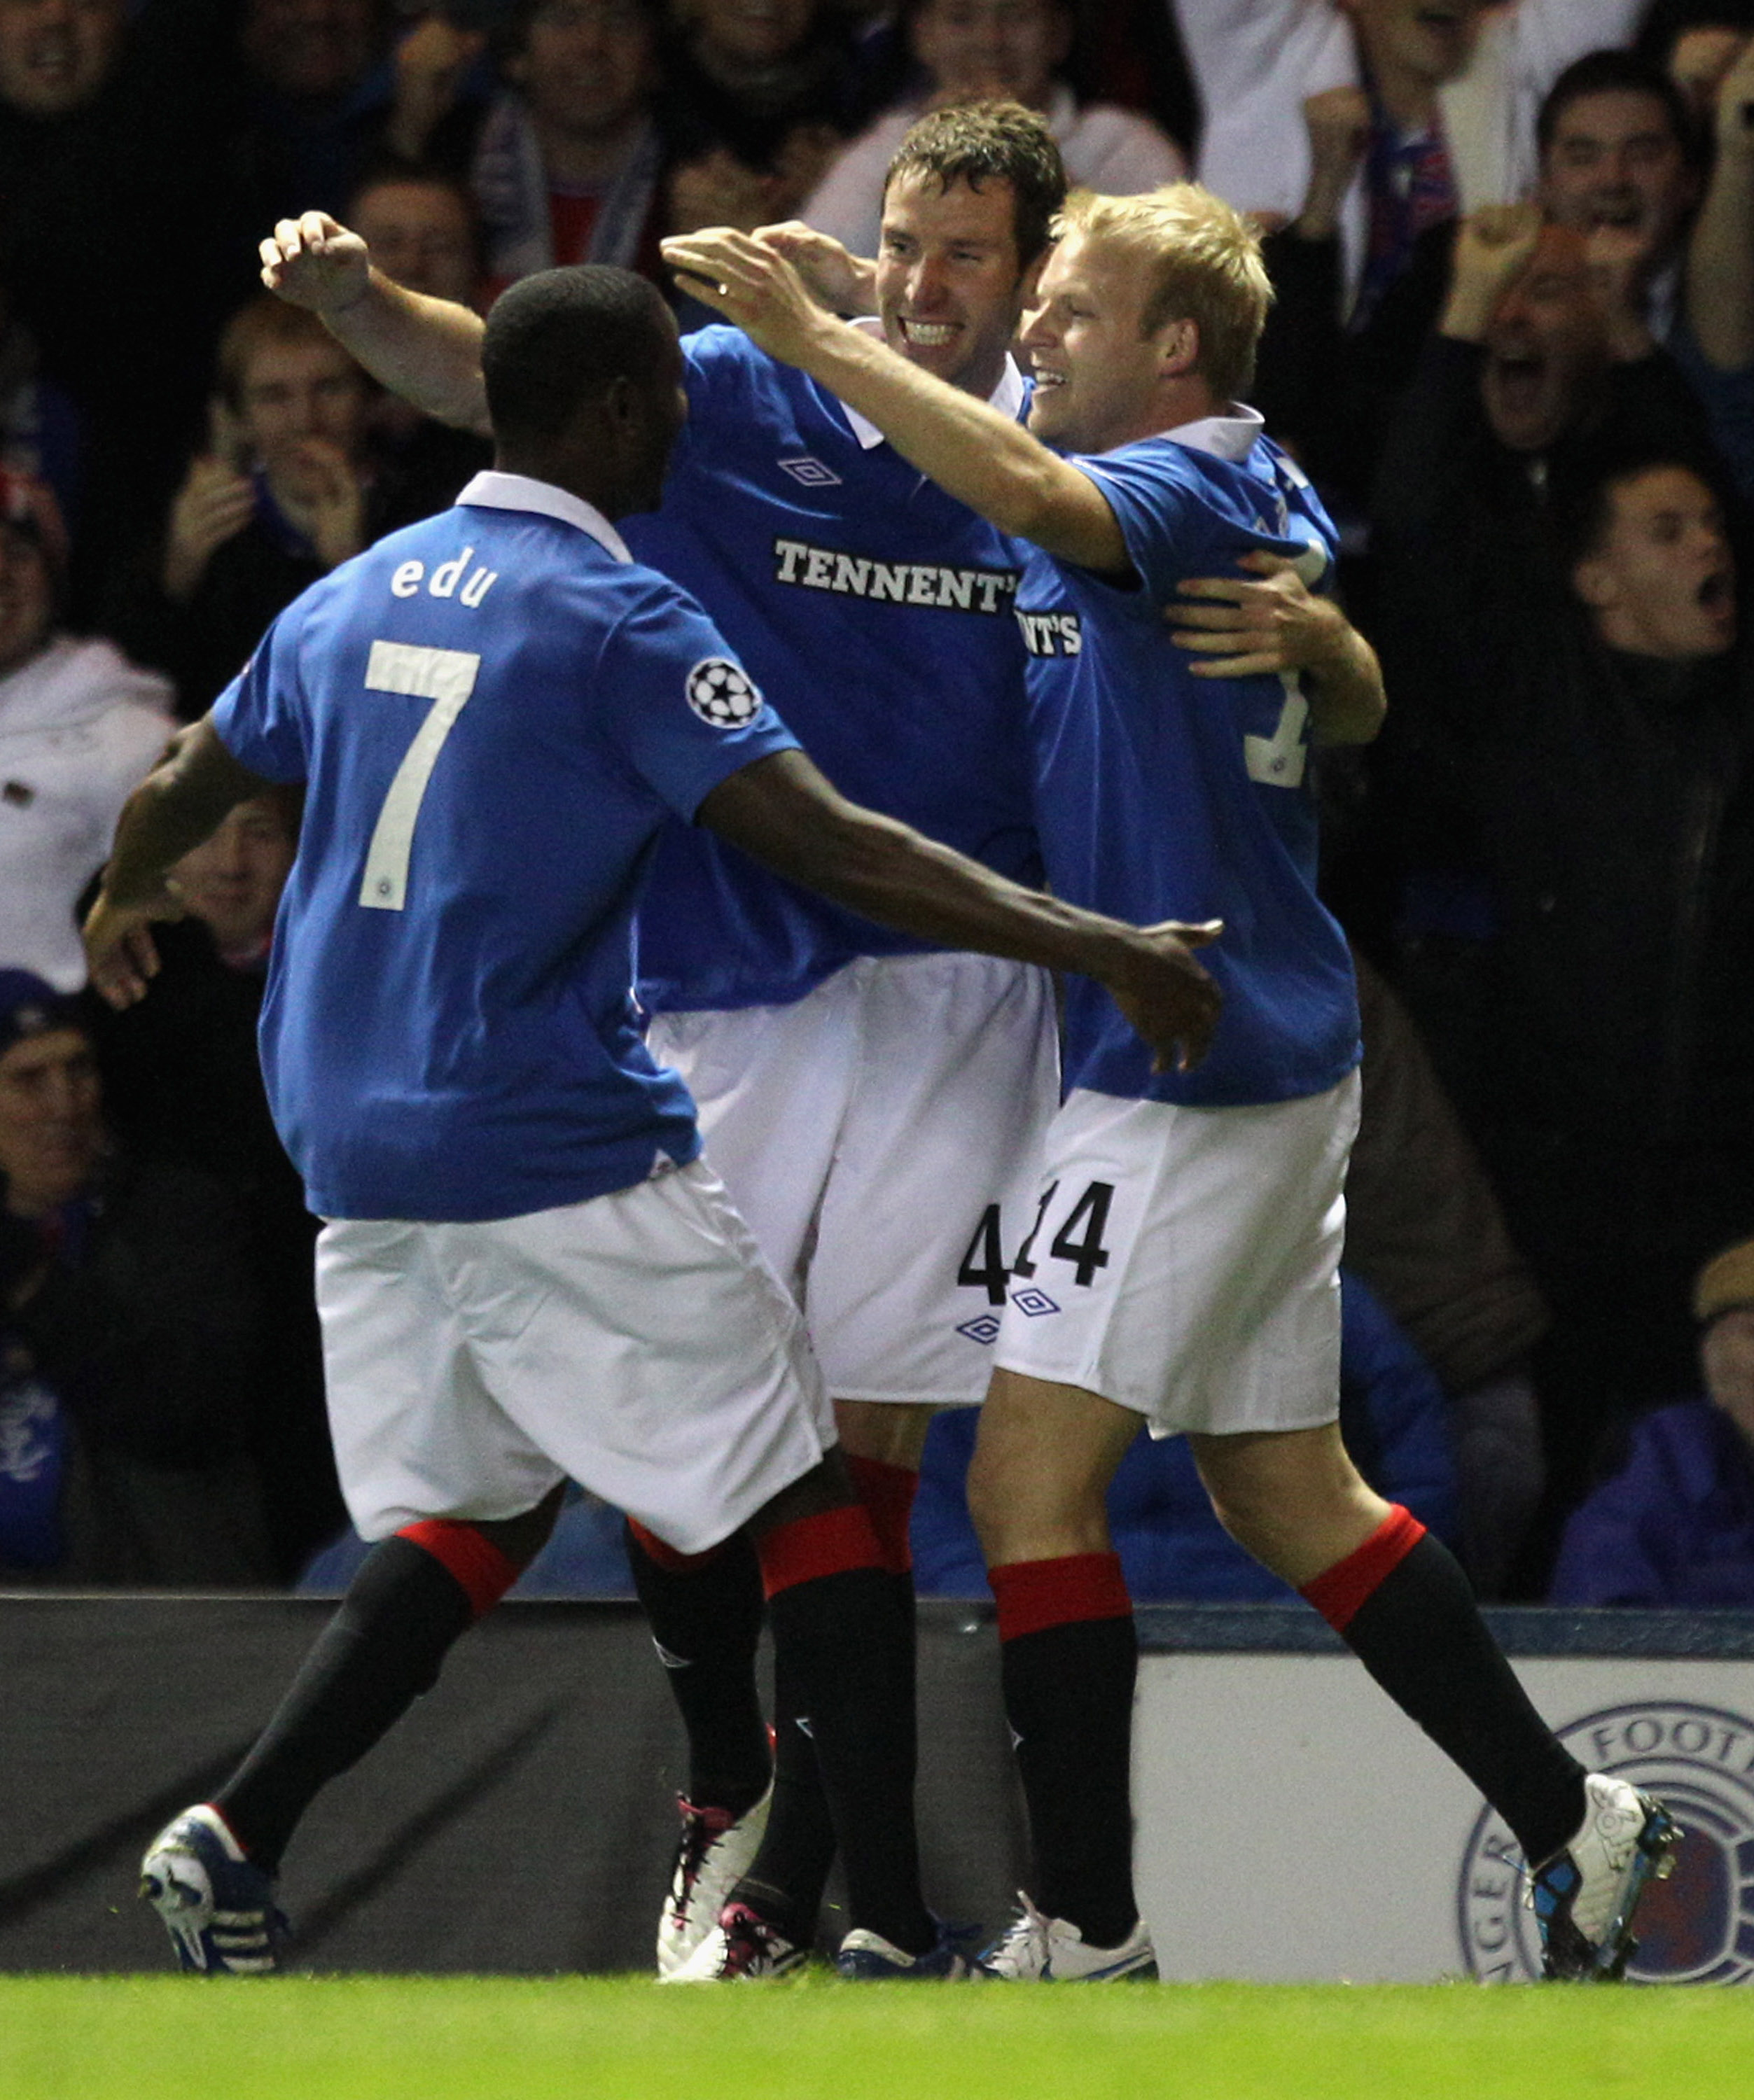 GLASGOW, SCOTLAND - SEPTEMBER 29:  Steven Naismith of Rangers celebrates with Daryl Broadfoot and Edu during the UEFA Champions League Group C match between Rangers and Buraspor Kulubu at Ibrox Stadium on September 29, 2010 in Glasgow, Scotland..  (Photo